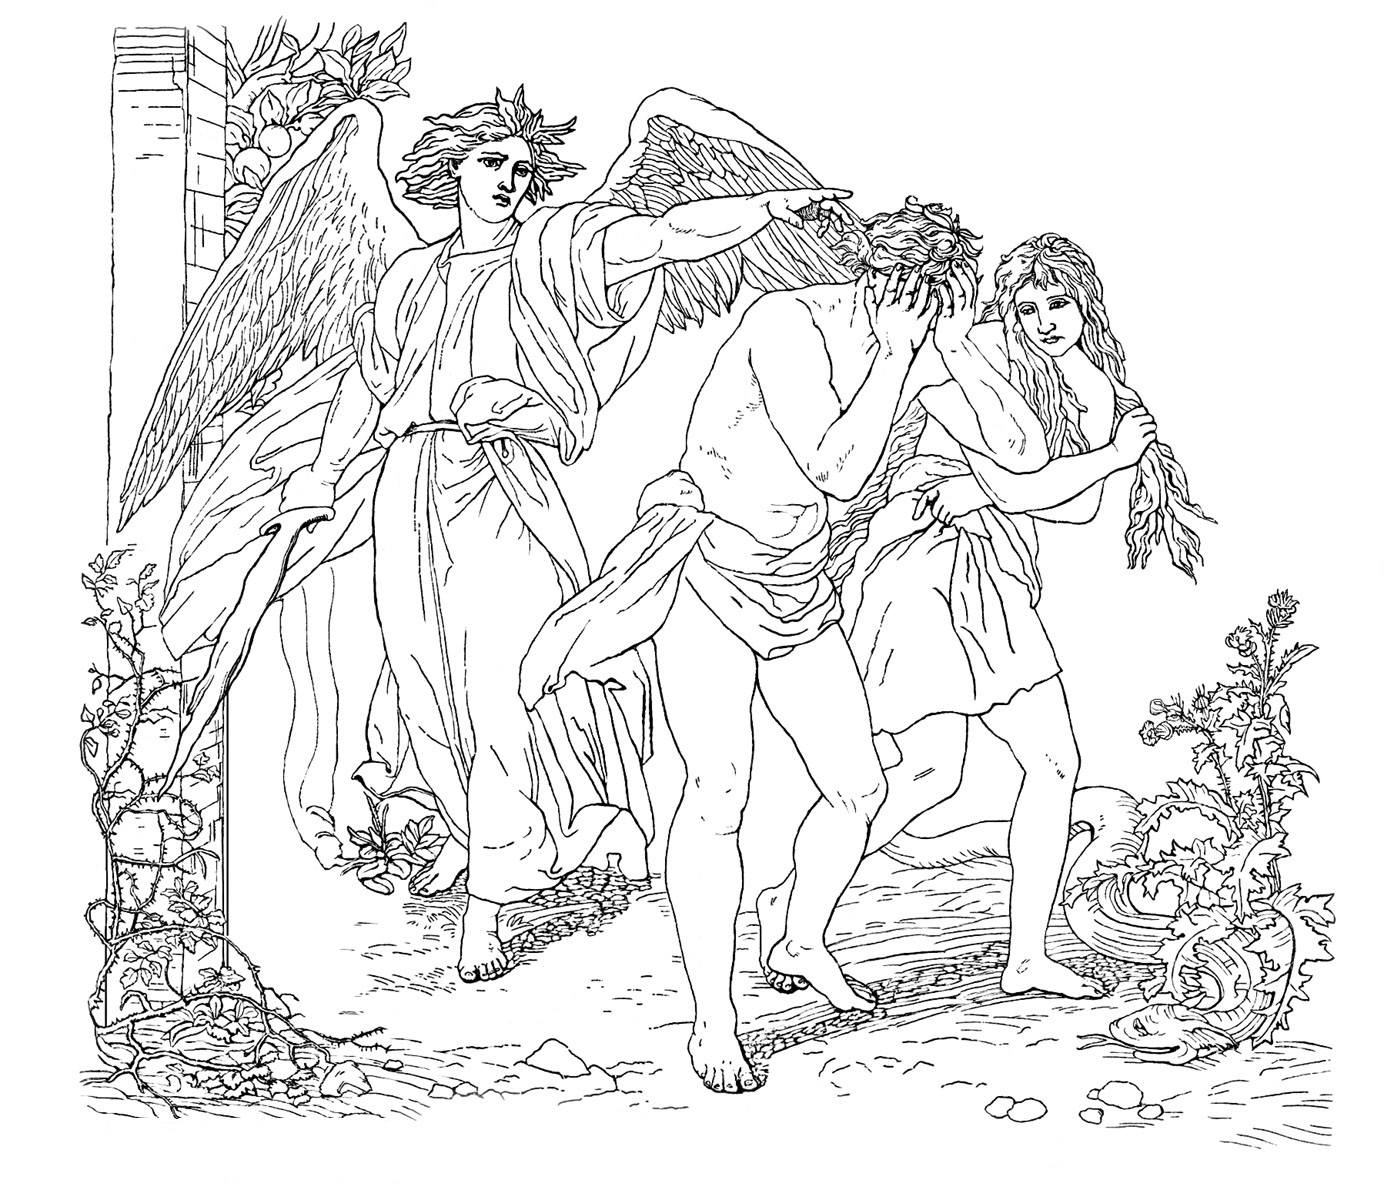 creation of adam and eve coloring pages